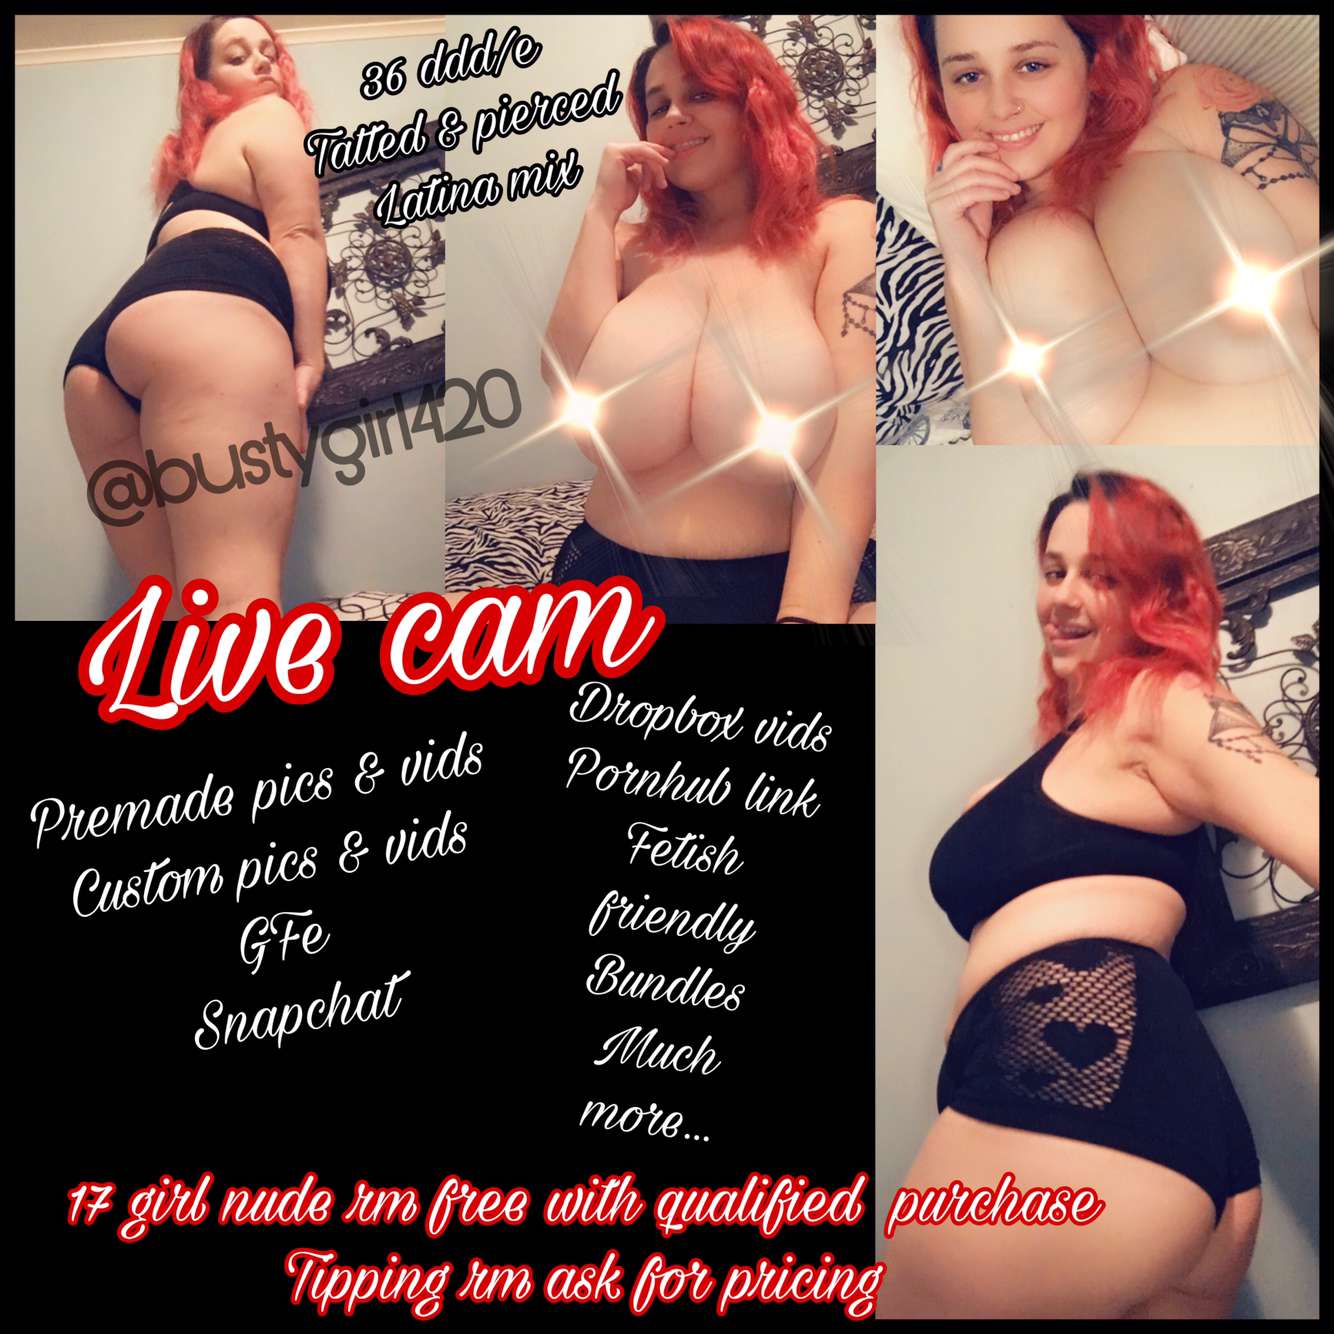 MILF❗pH model❗Kik @bustyslutt420:Twitter kimmiej444❗ Sexting ❗nudes❗  vids❗36 DDDs tatted&pierced❗cheap content❗get nudes all day with my gfe  sale | KikDirty Free Porn Forum.